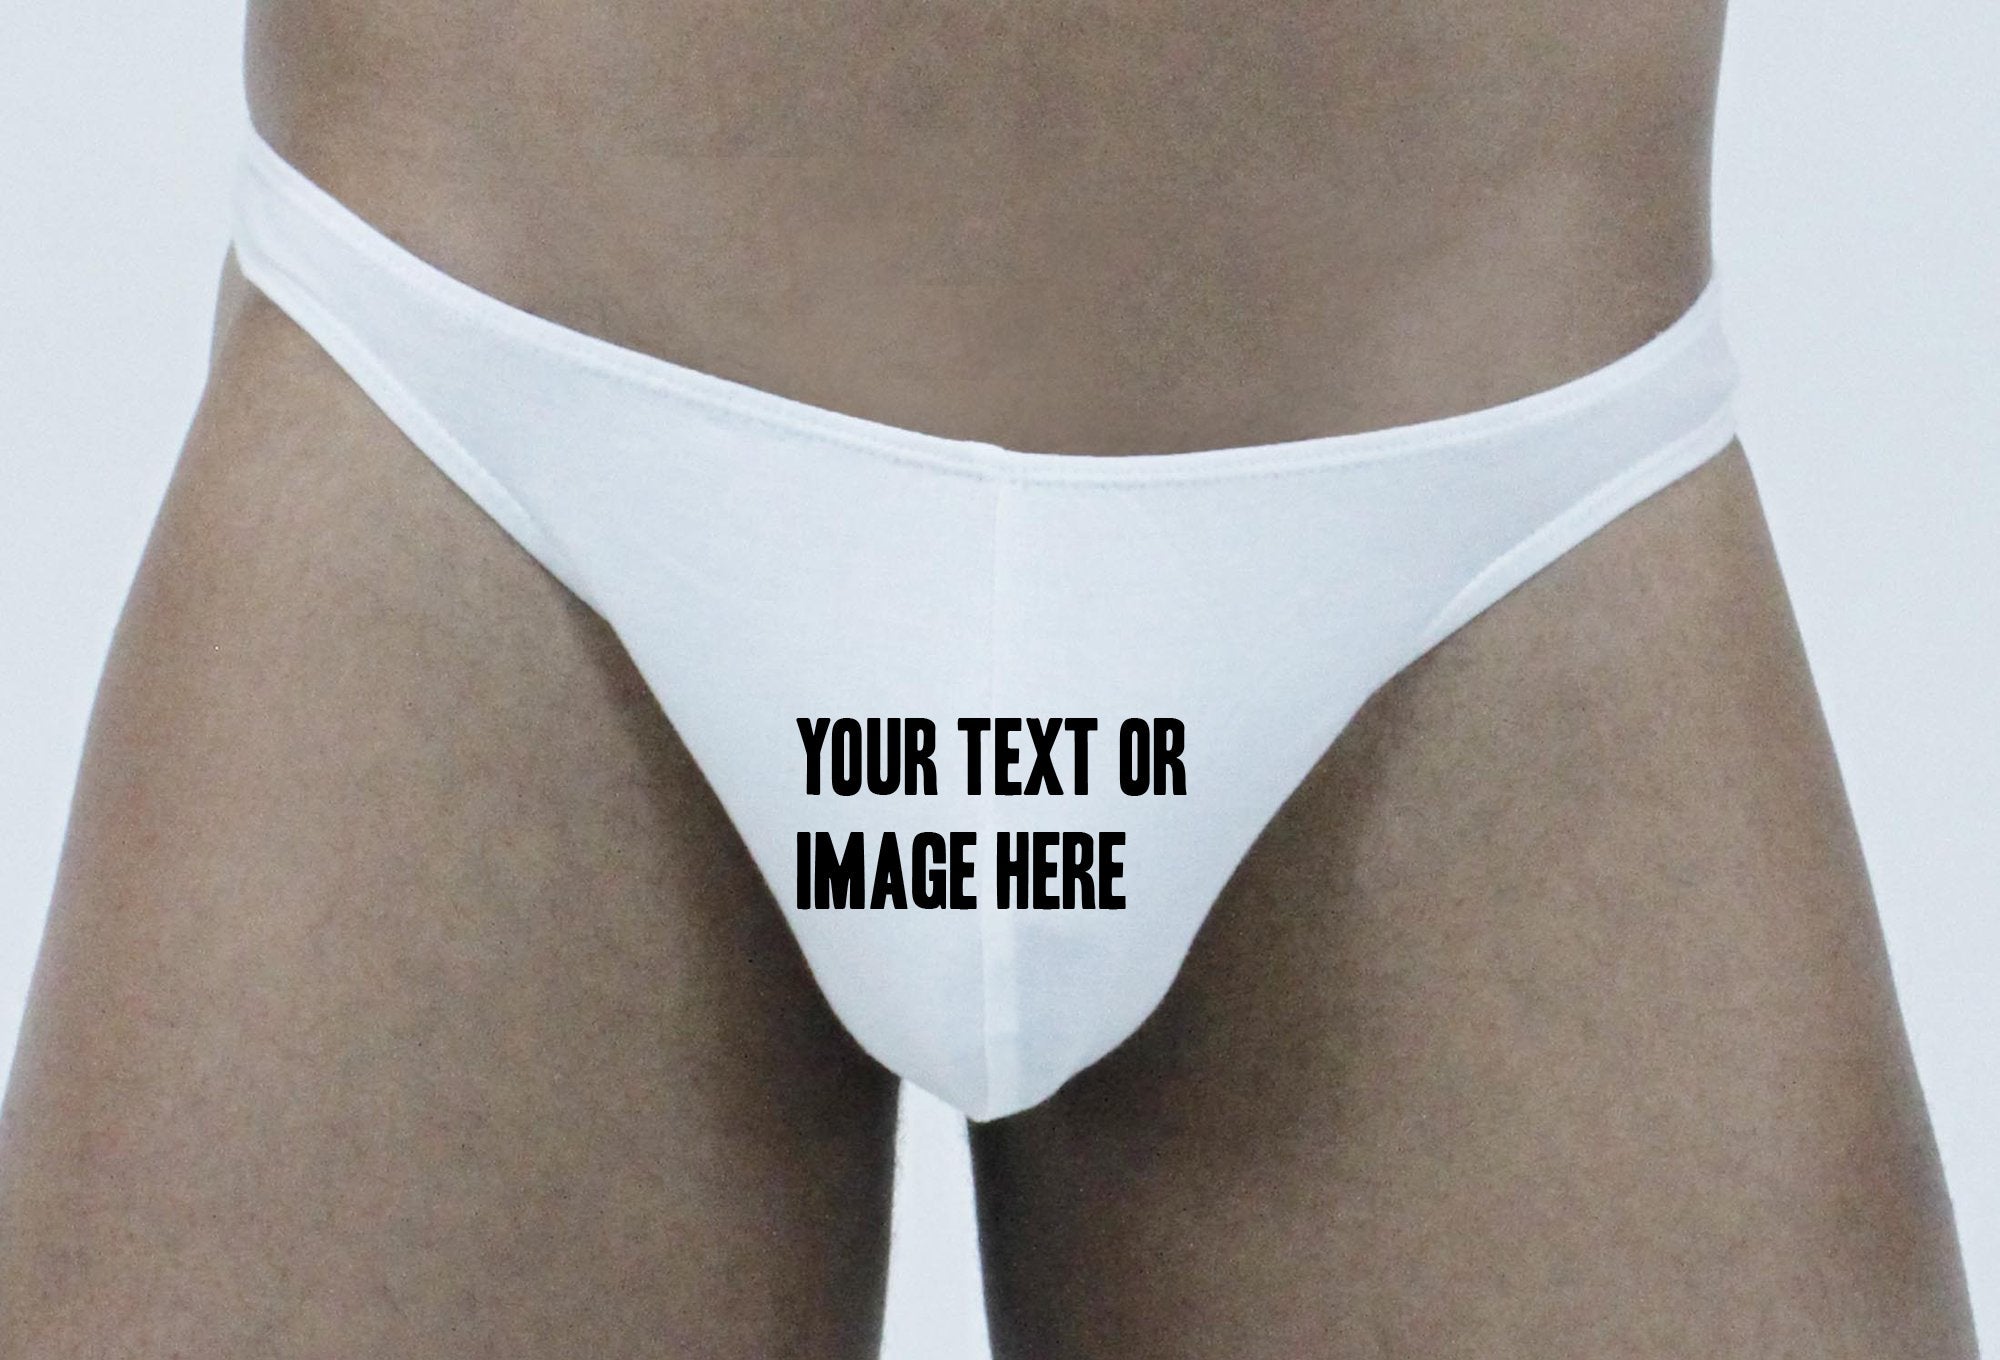 Custom Face Thong Panties Personalized Photo Print Underwear Design Funny  Thong With Picture Customized Panties Lingerie Gift for Her -  Canada